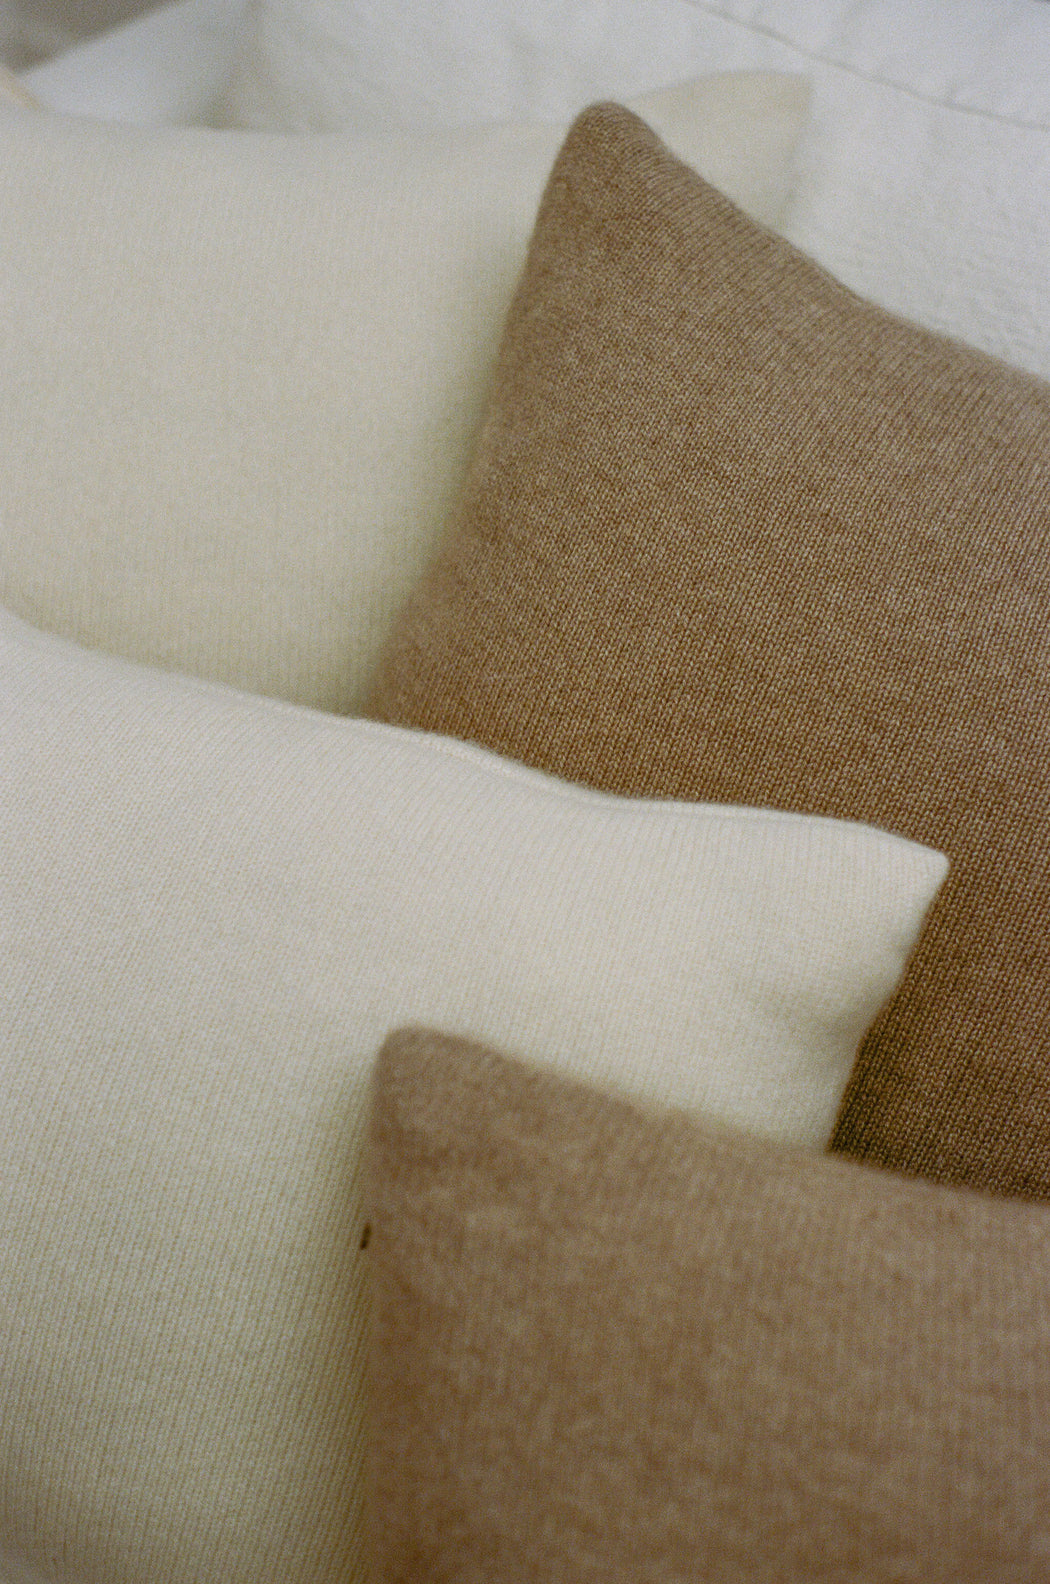 Bespoke 24" Italian Cashmere Jersey Knit Down Pillow - Custom Colors Made to Order (8-Week Lead Time)